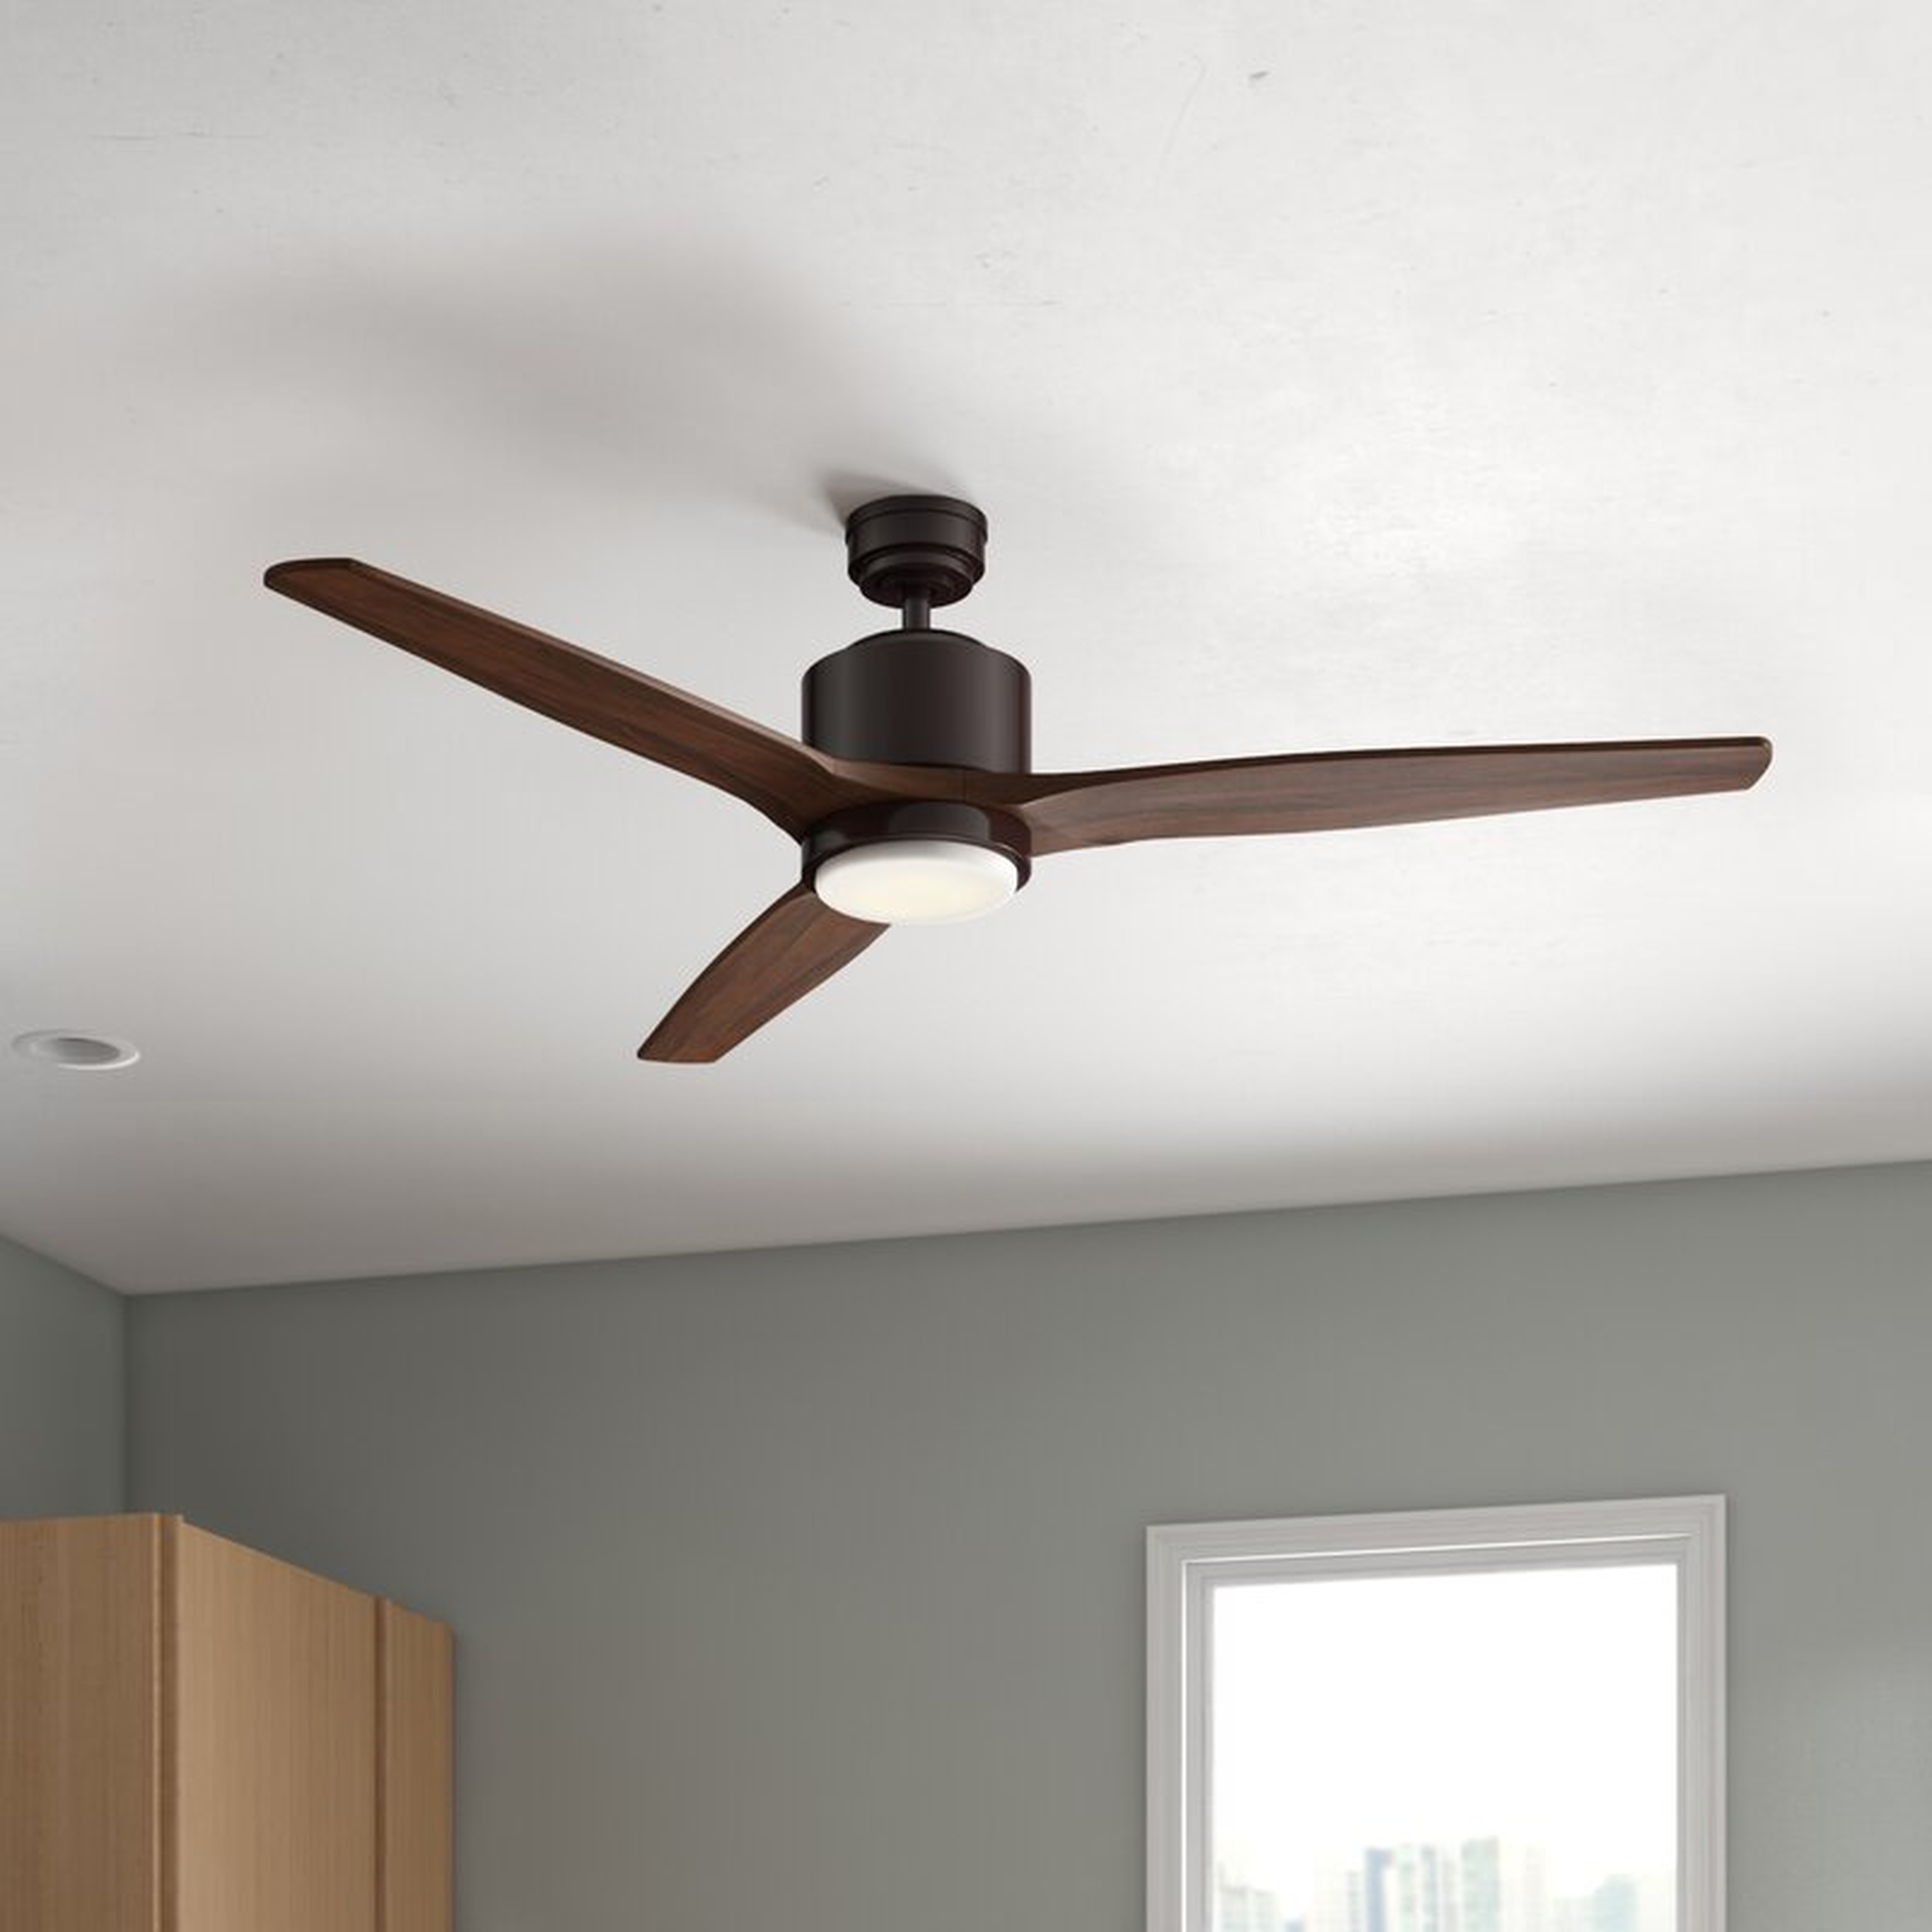 56'' Medders 3 - Blade LED Standard Ceiling Fan with Remote Control and Light Kit Included - Wayfair